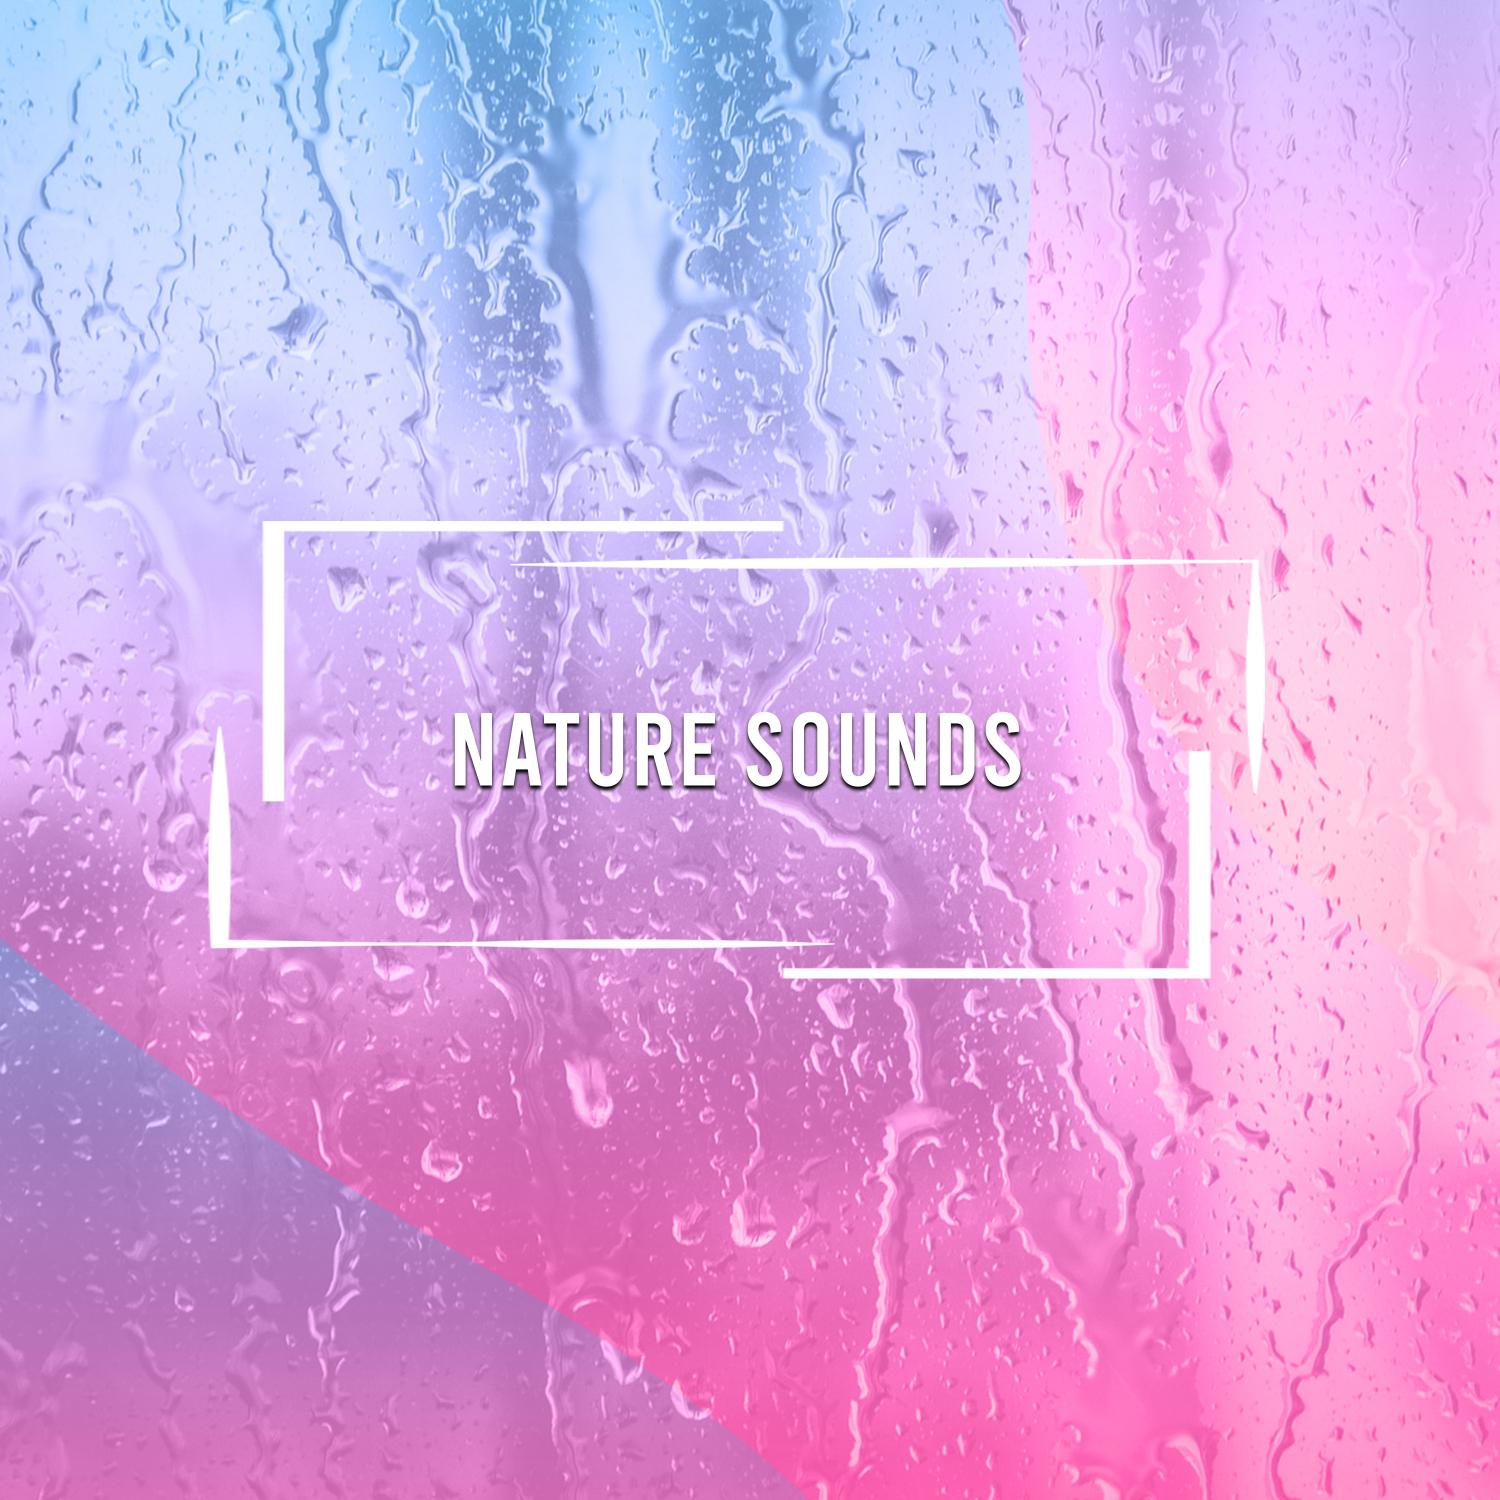 5 Loopable Nature Sounds for Meditation, Relaxation, Spa, Yoga and Zen